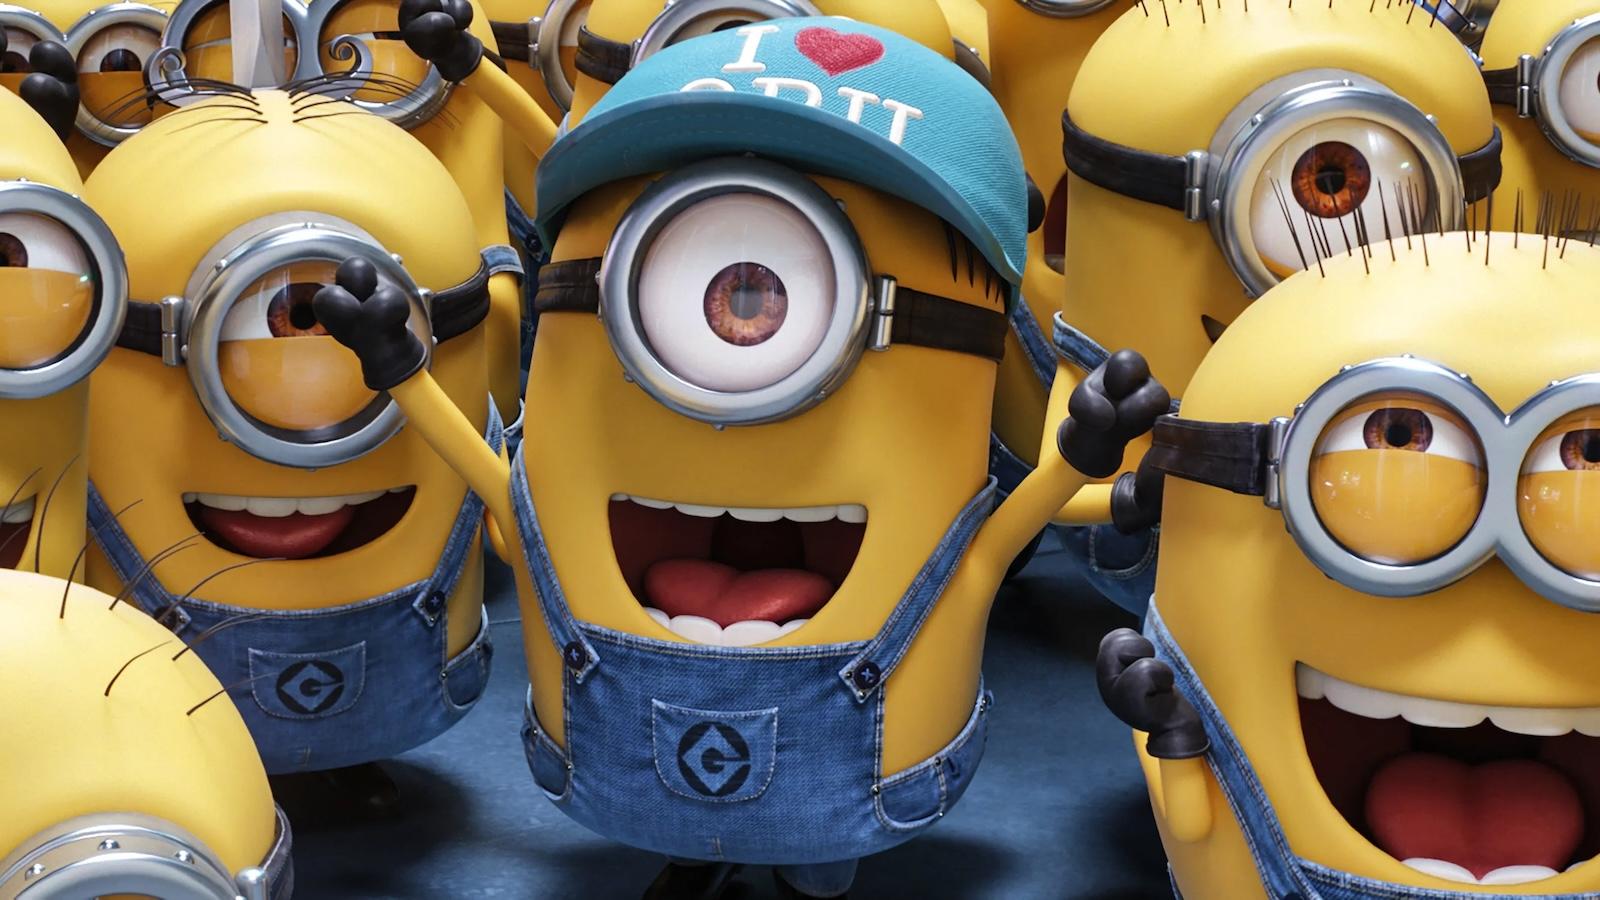 The Minions in Despicable Me